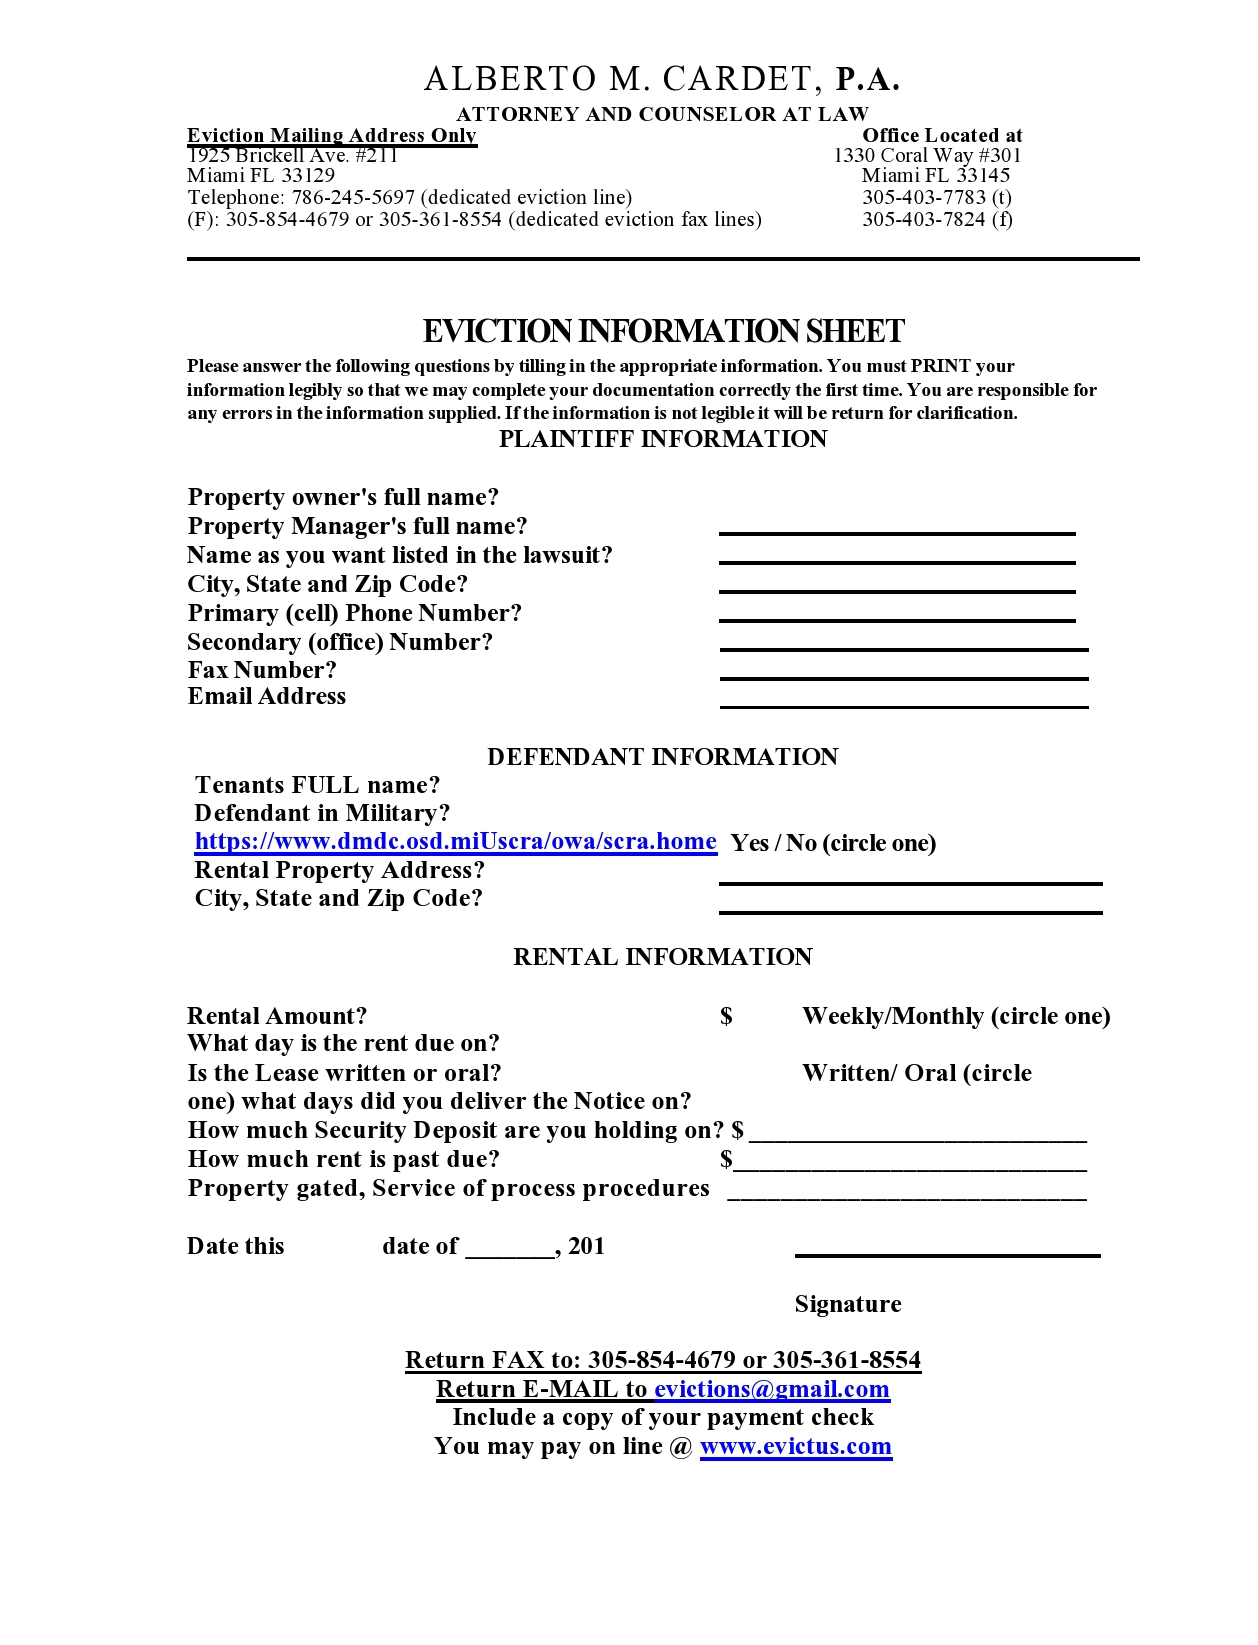 Eviction Without Tenancy Agreement Eviction Information Sheet Representation And Fee Agreement